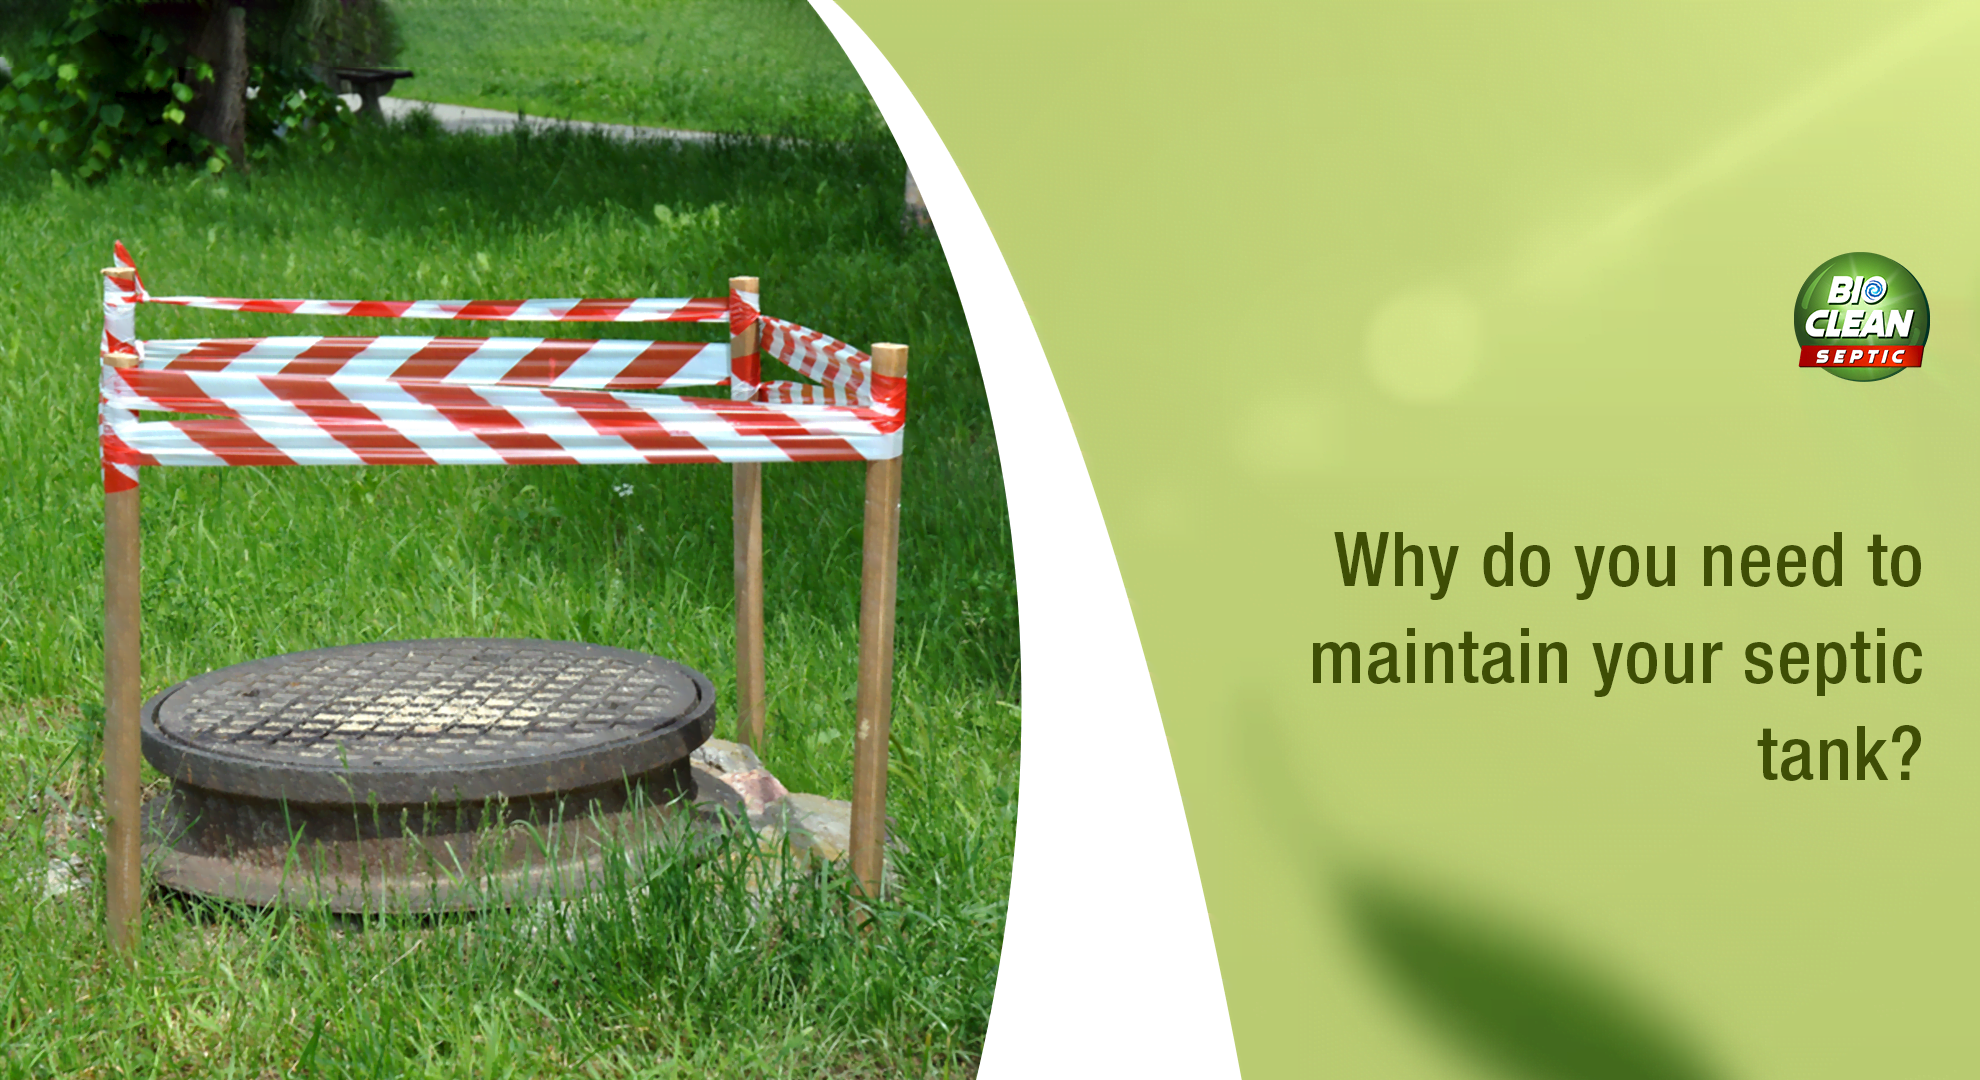 Why Do You Need To Maintain Your Septic Tank?